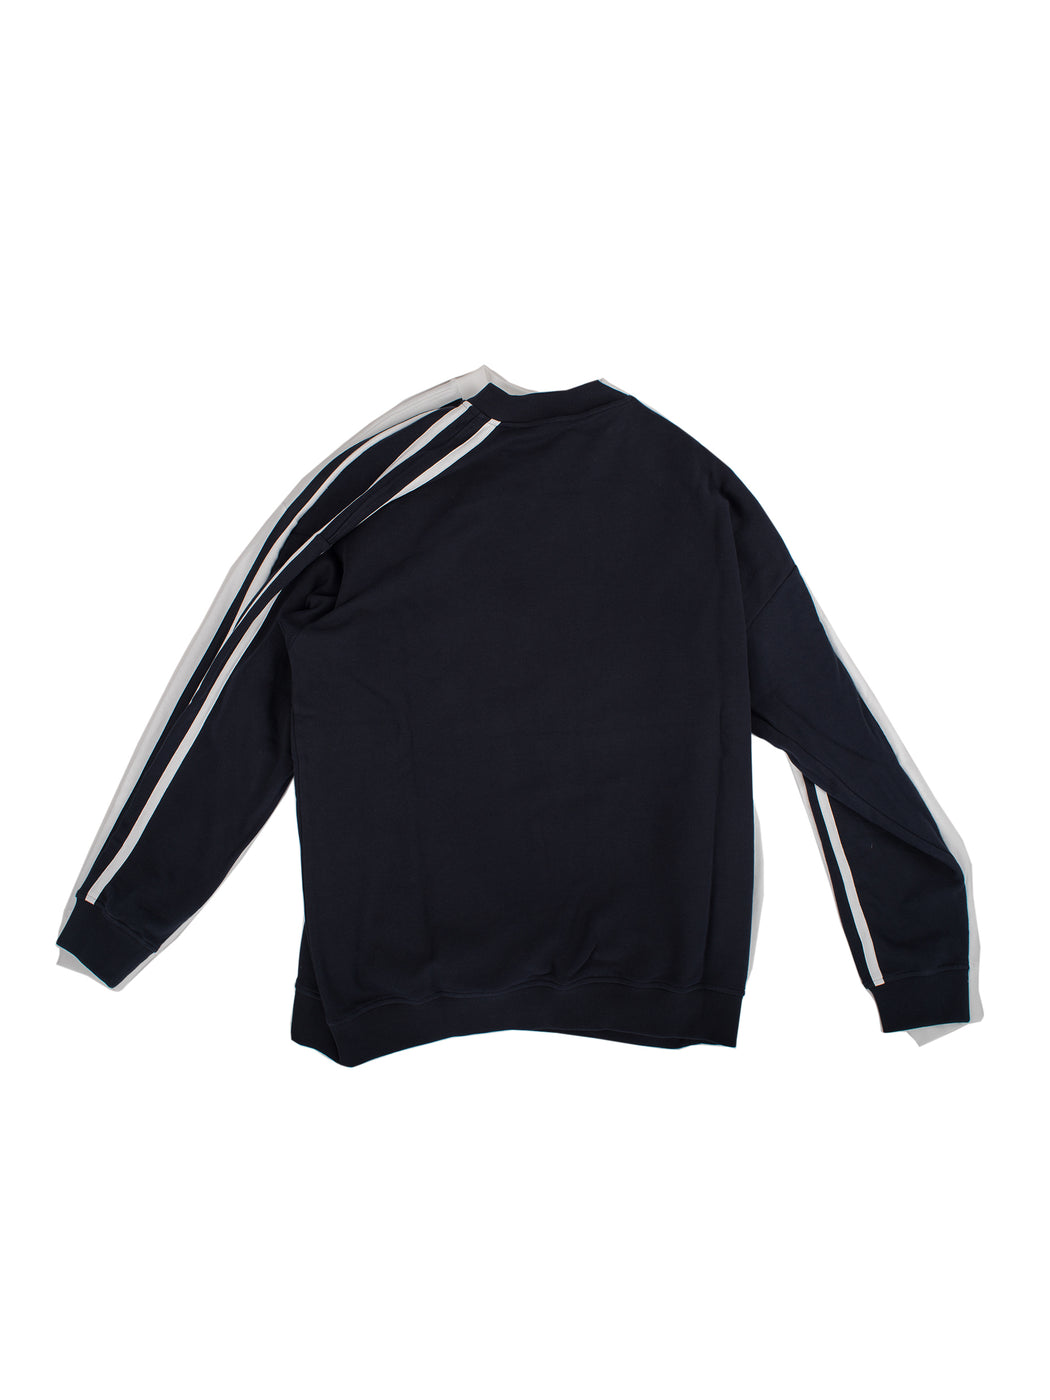 Double Sweater - Navy/White